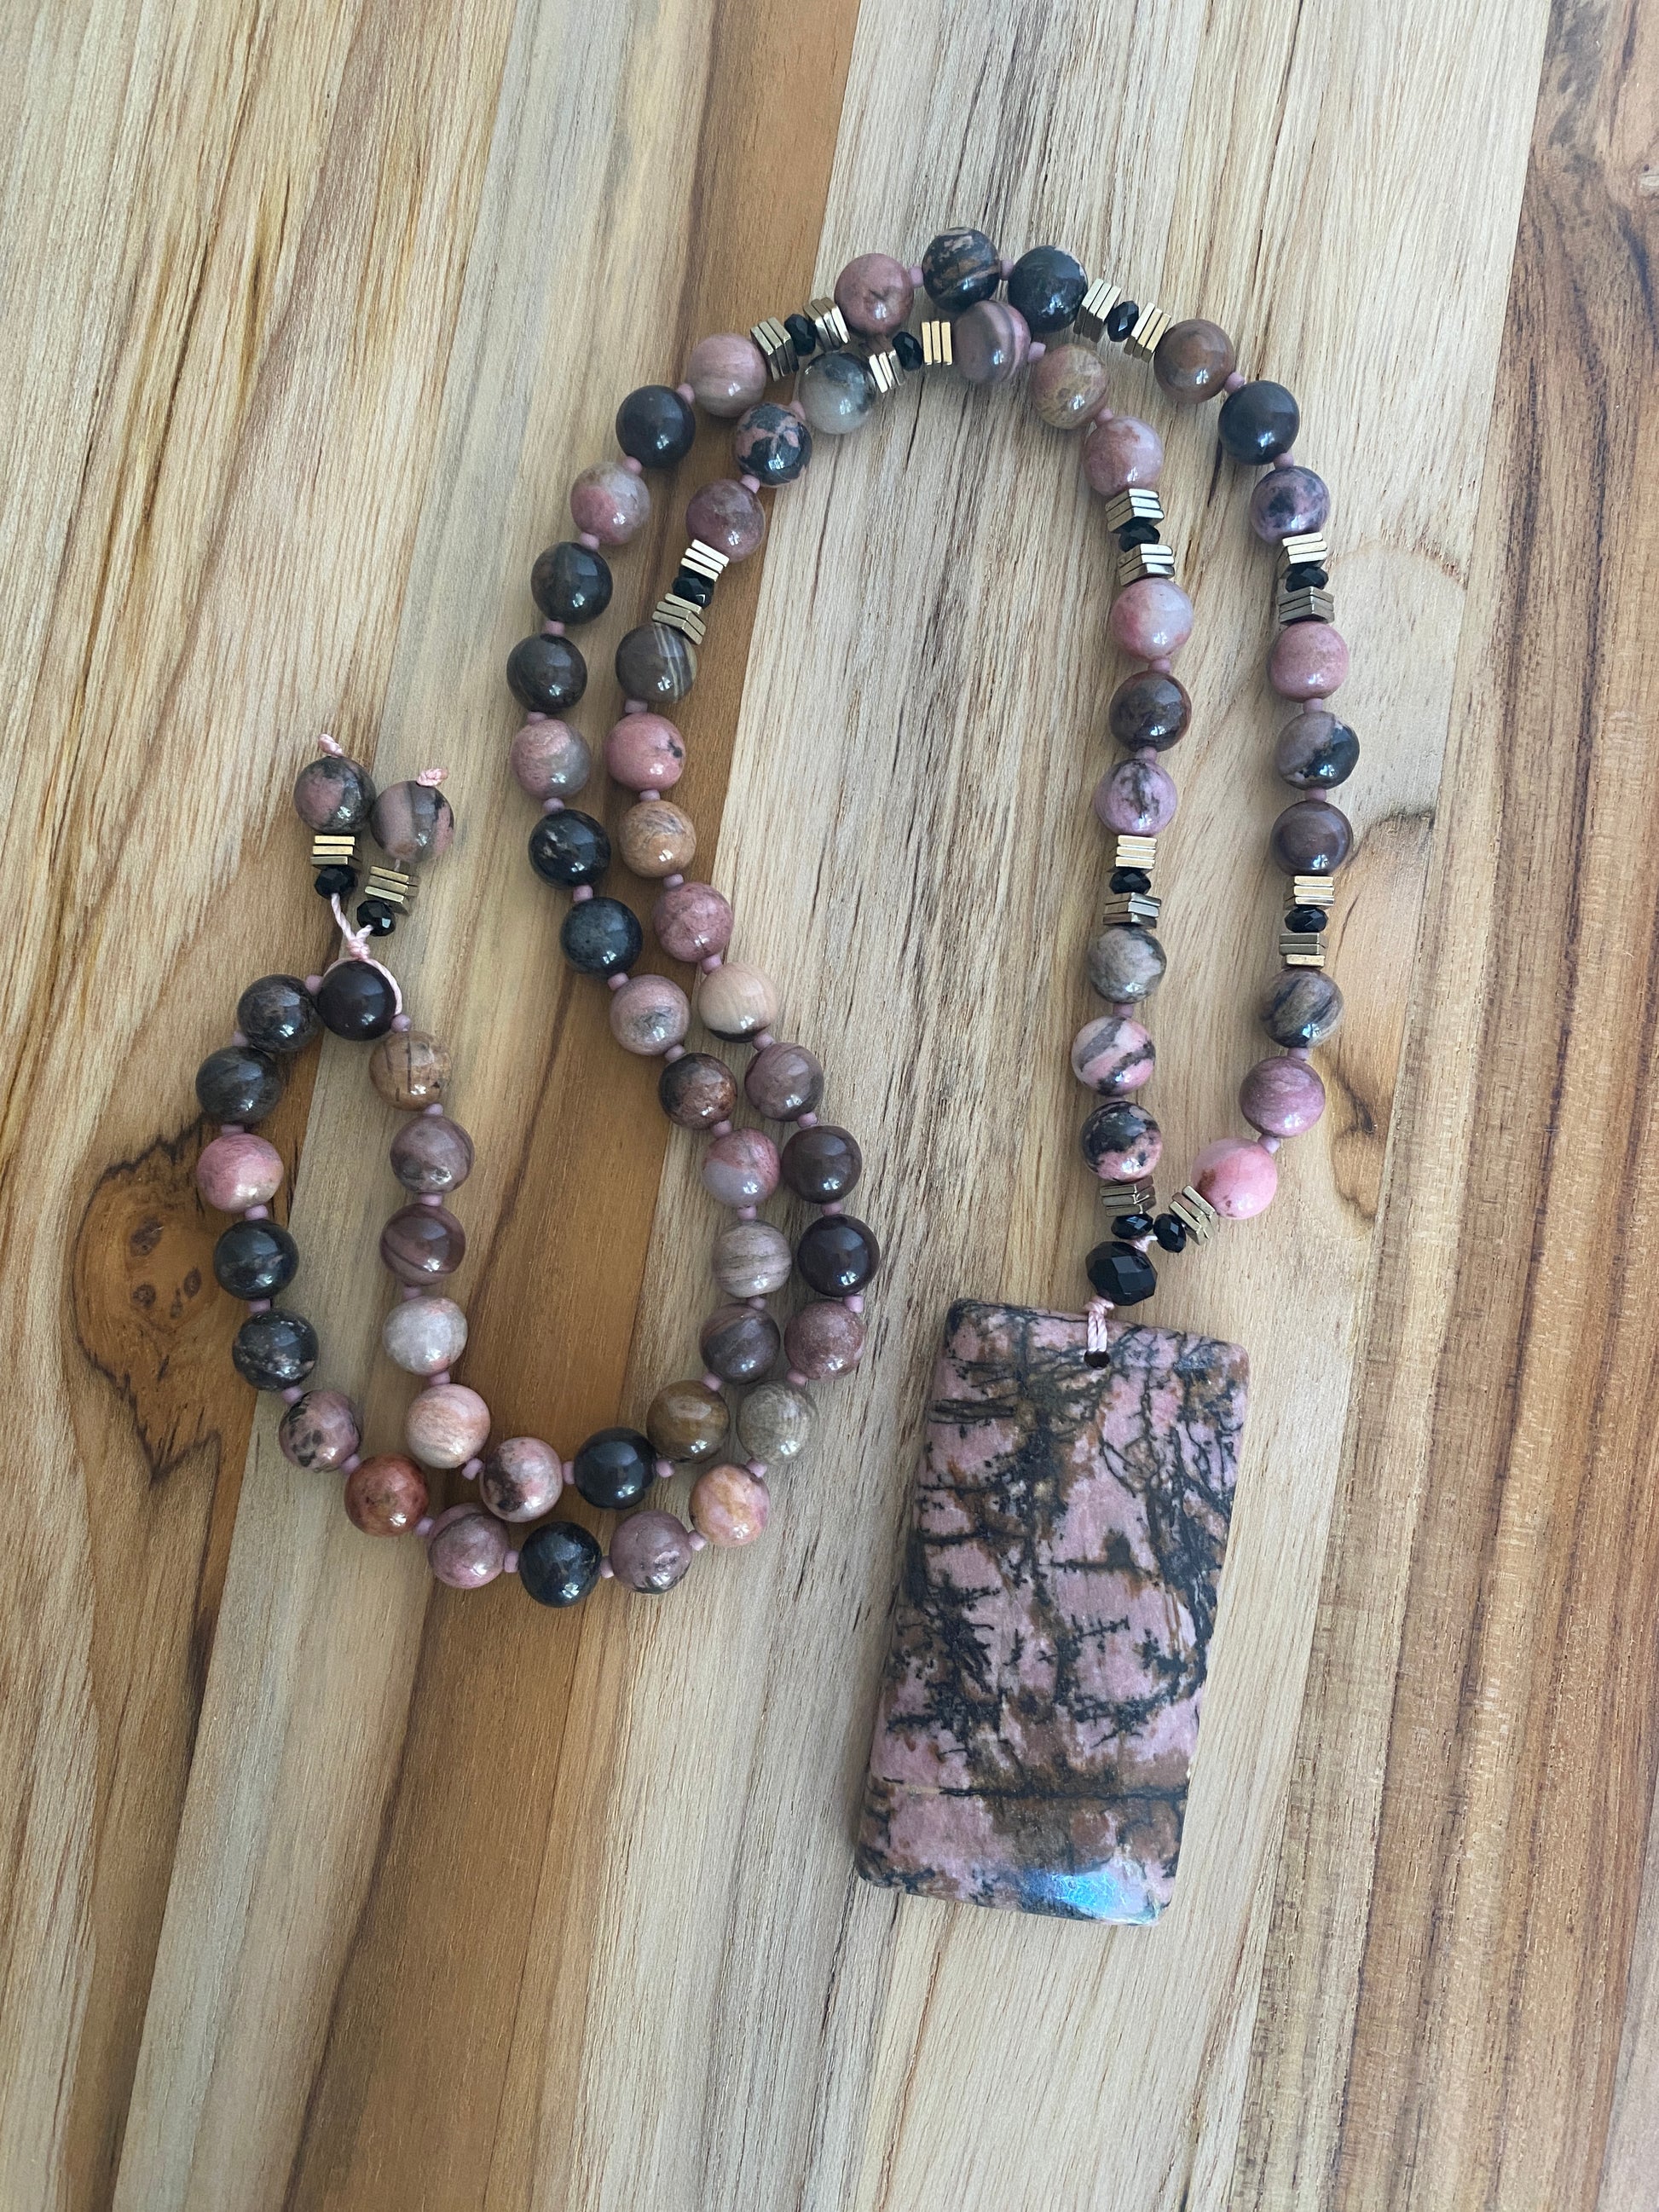 28" Long Beaded Pink and Black Rhodonite Pendant Necklace with Black Crystal Beads